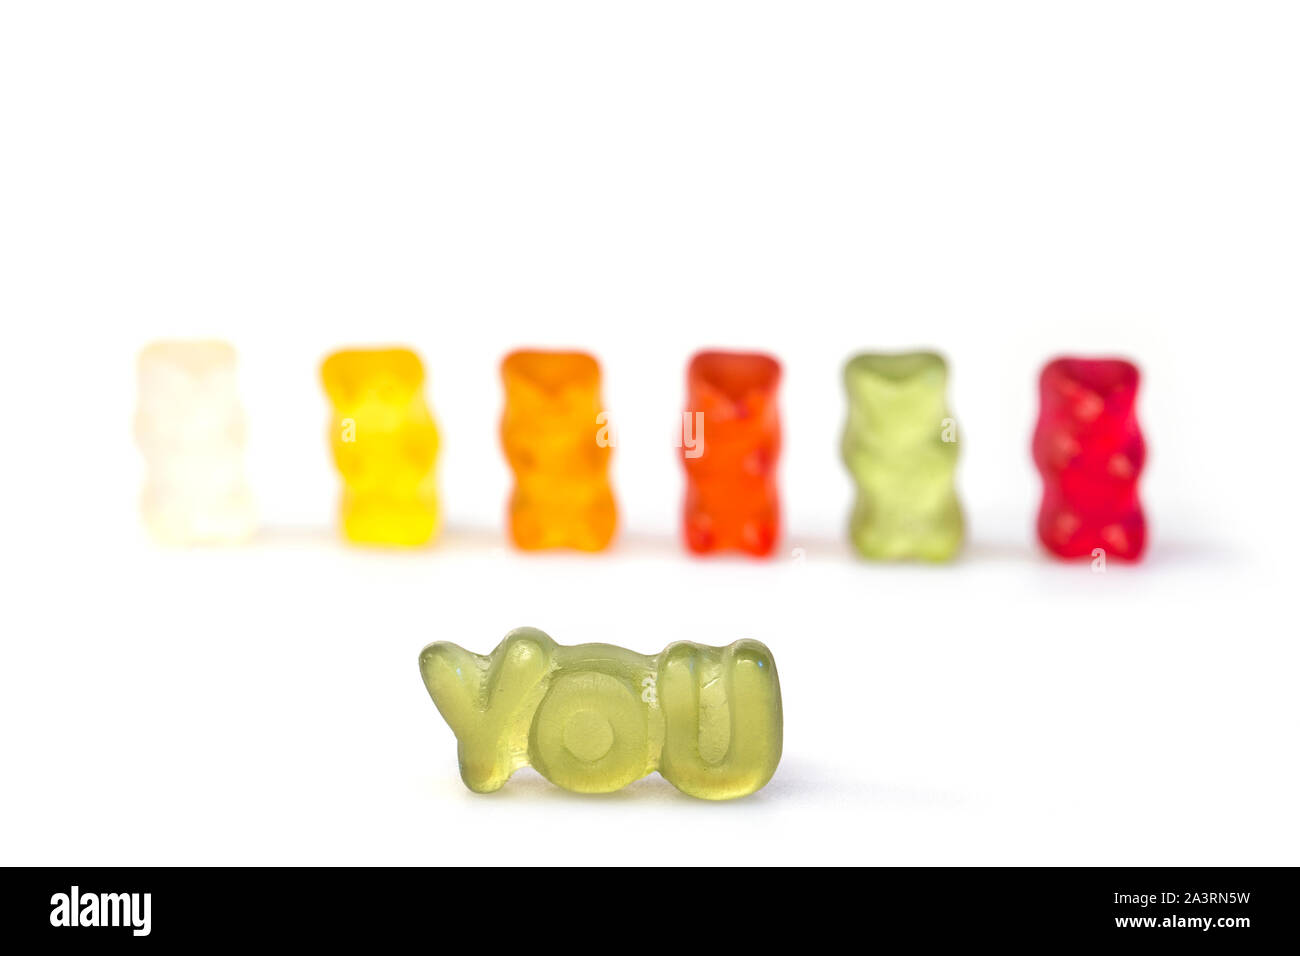 Gummy bears as concept of the awareness of being part of a team. Stock Photo